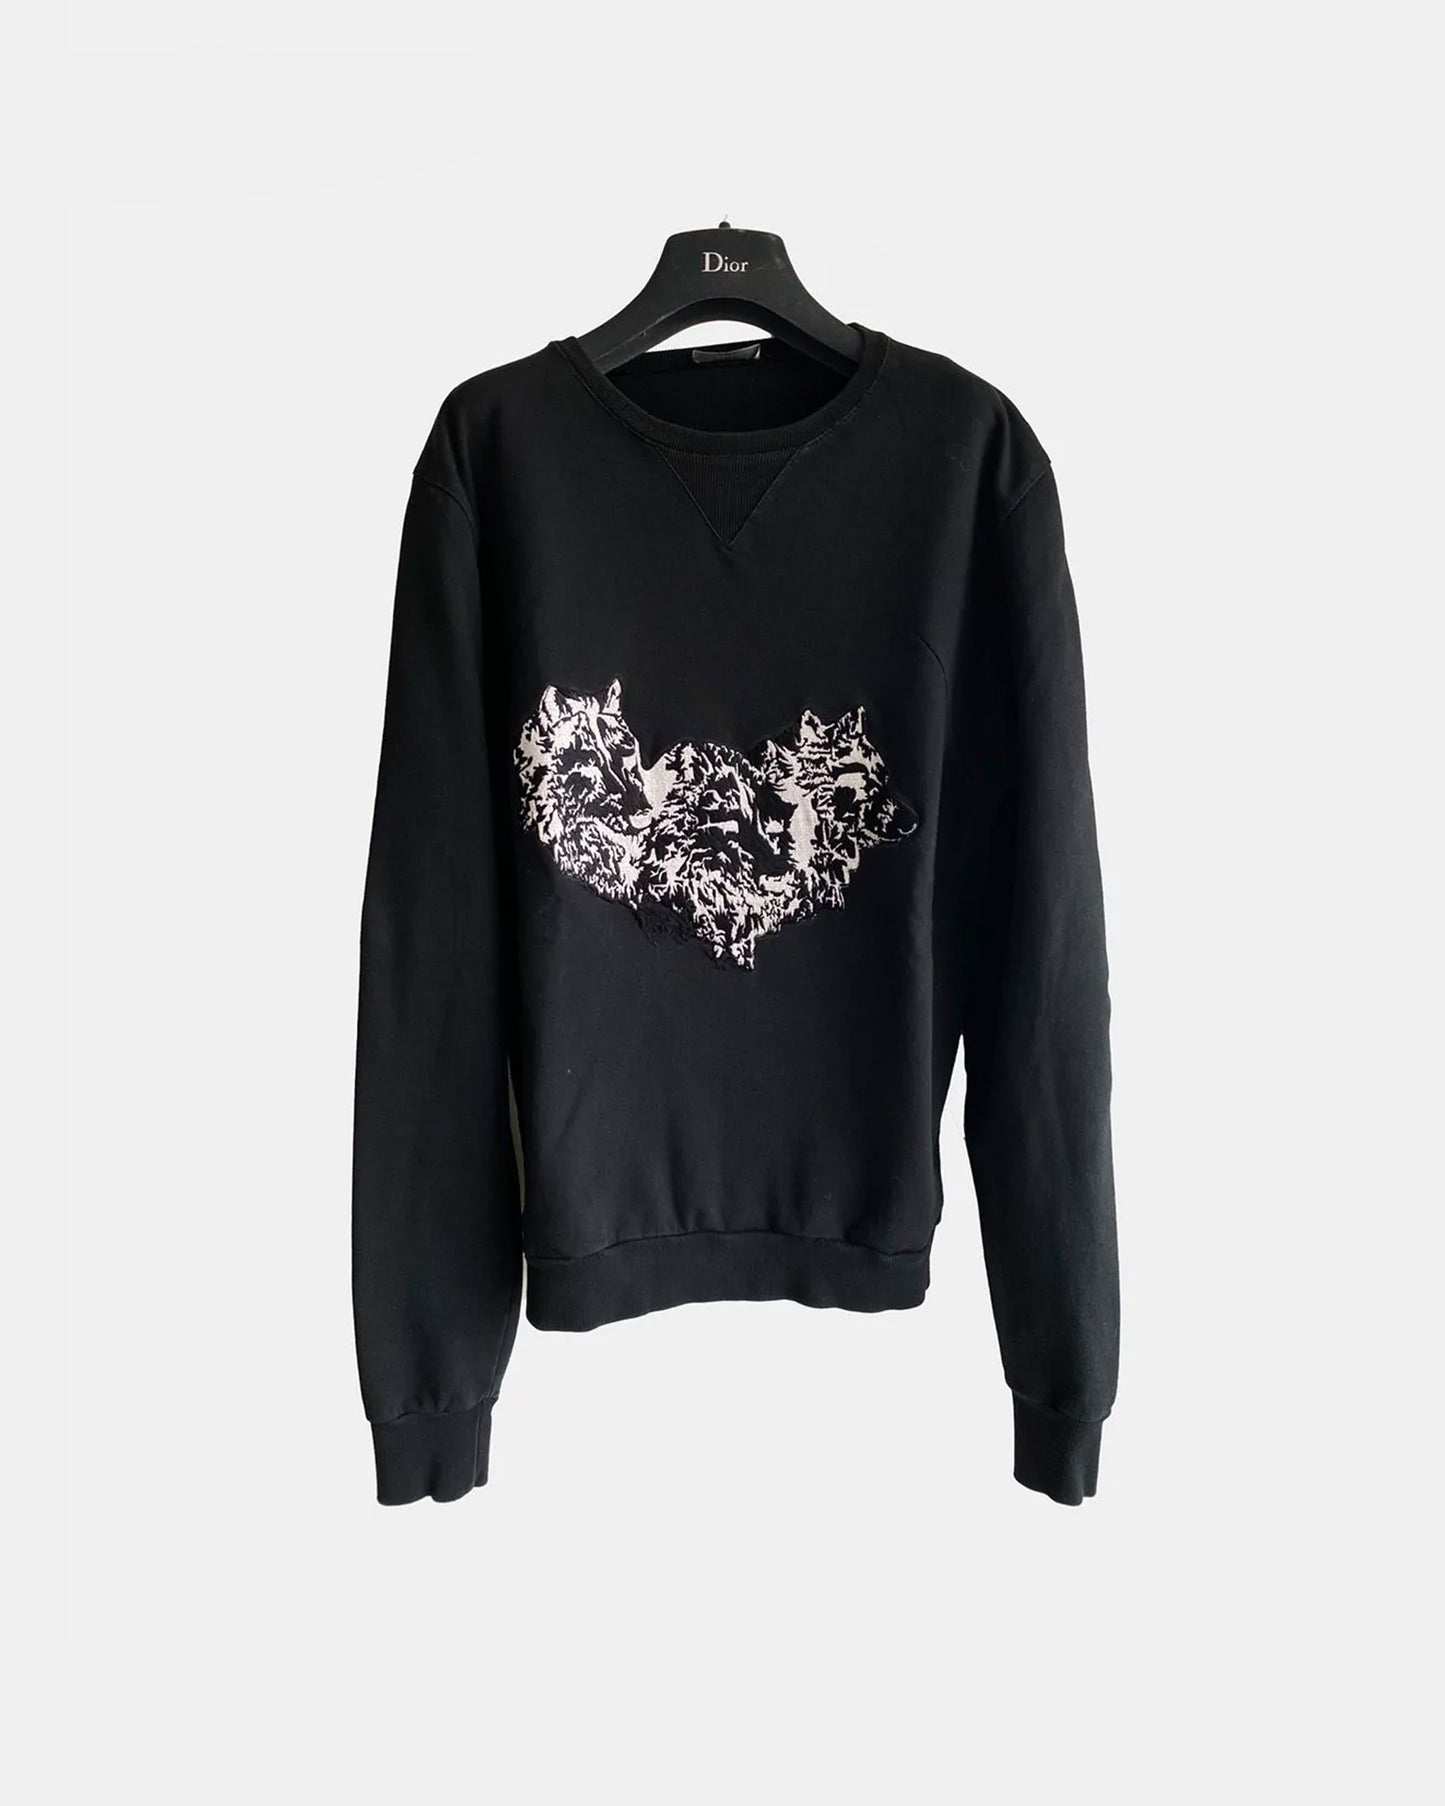 Dior Homme 05 ‘Wolves’ Wolf Pack Jumper Sweater